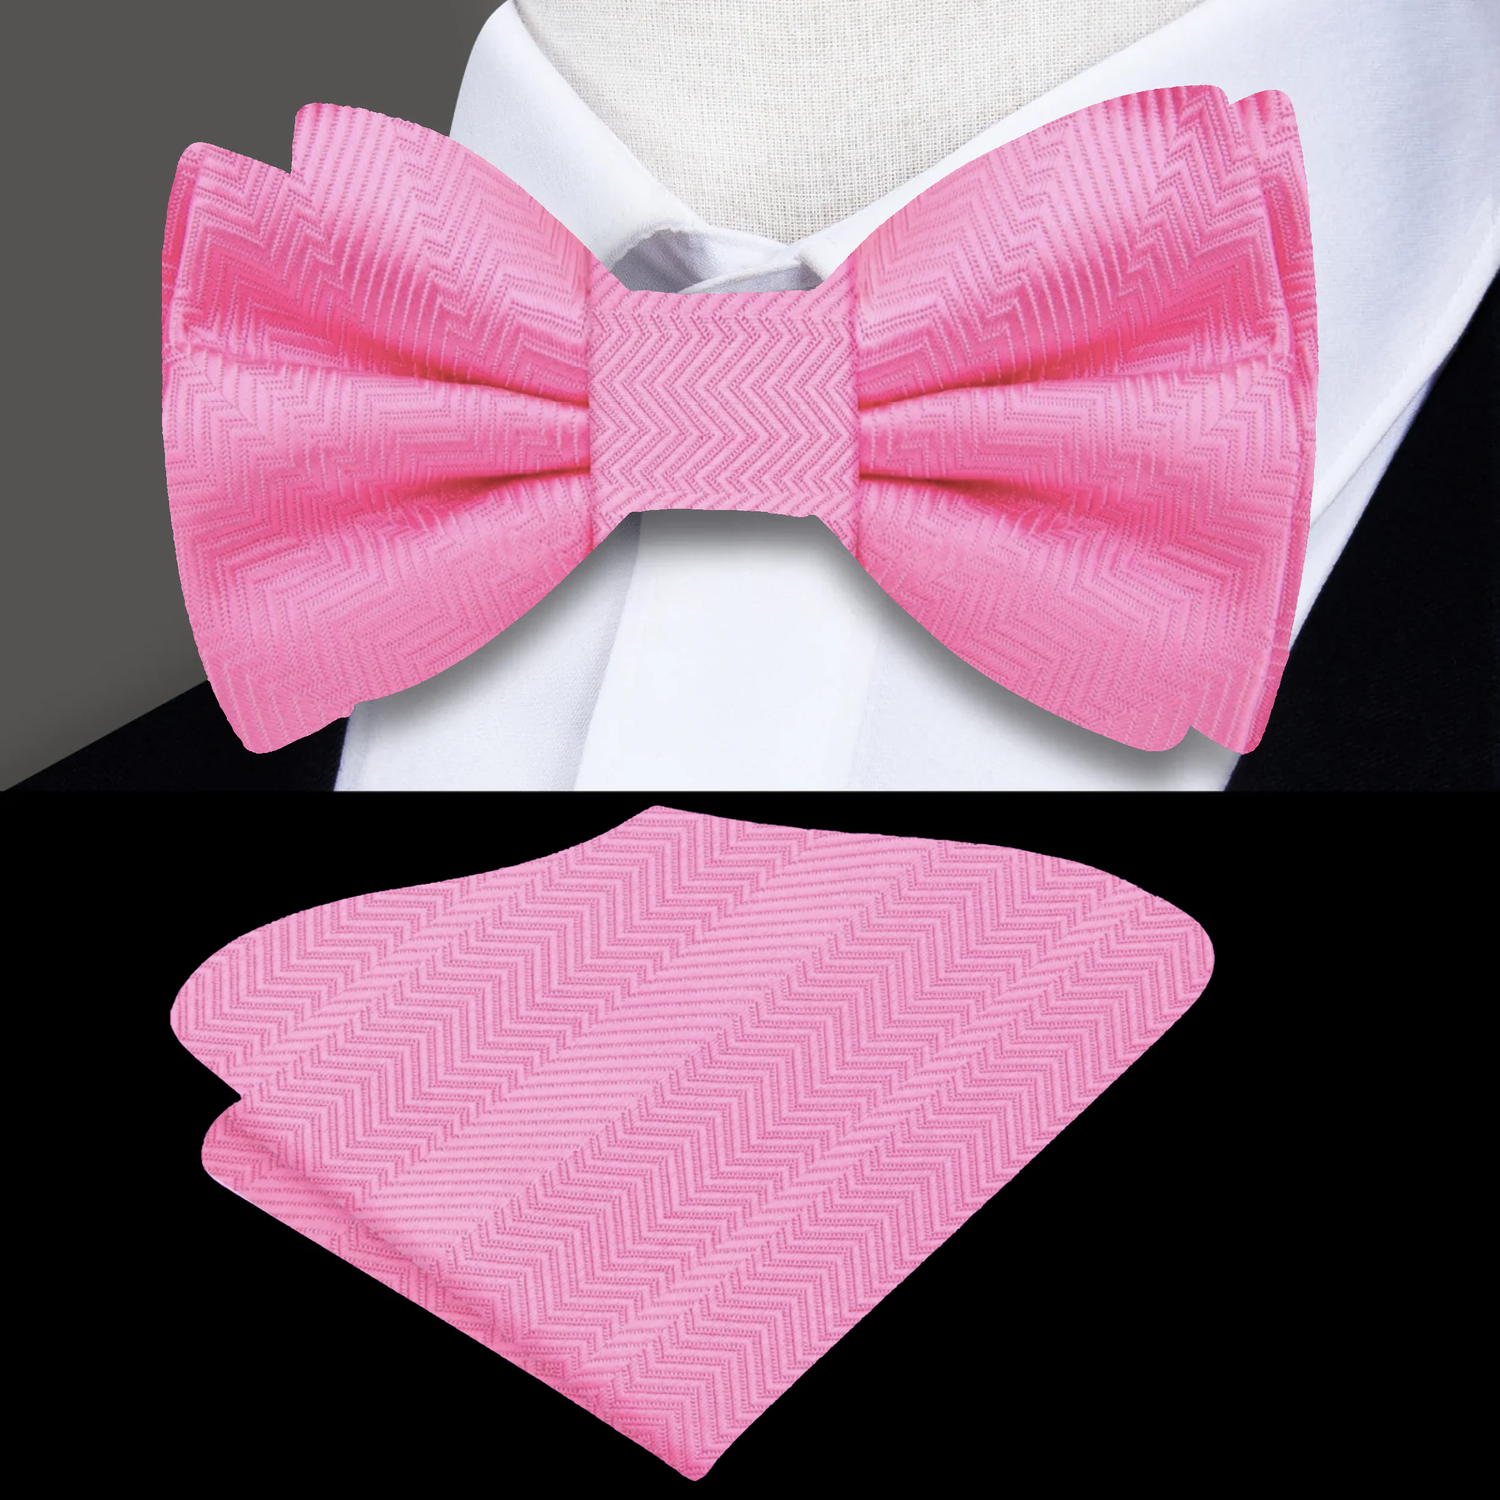 Main View: A Real Pink Solid Pattern Self Tie Bow Tie, Matching Pocket Square